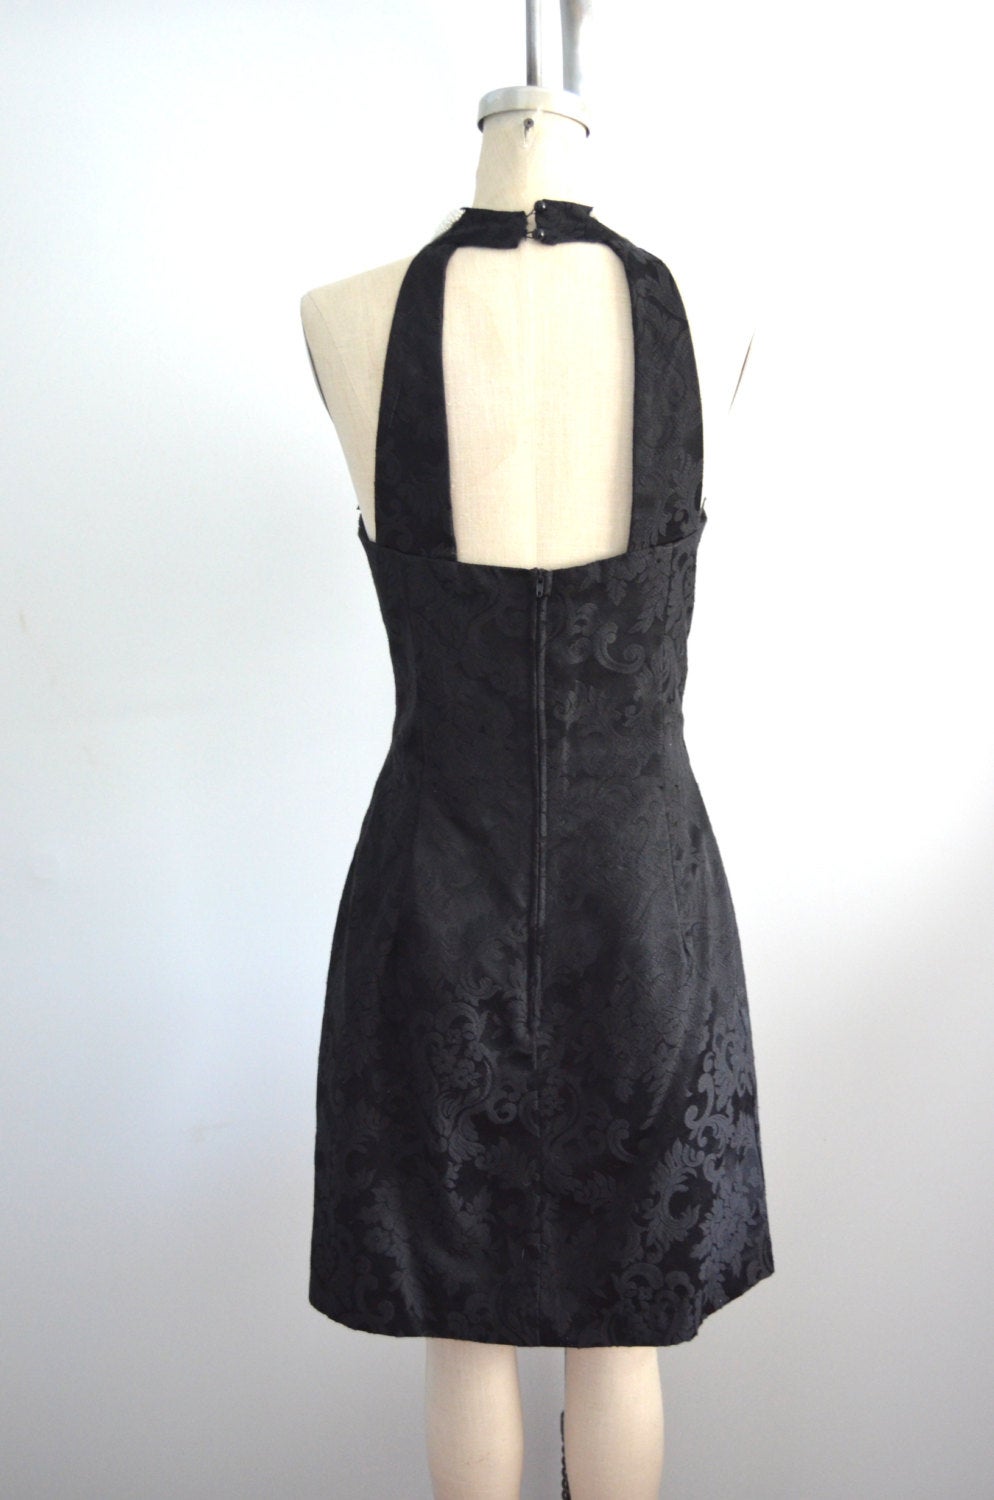 Black Brocade Dress Sweetheart Pearl Embroidered Halter Dave & Johnny Cocktail Dress